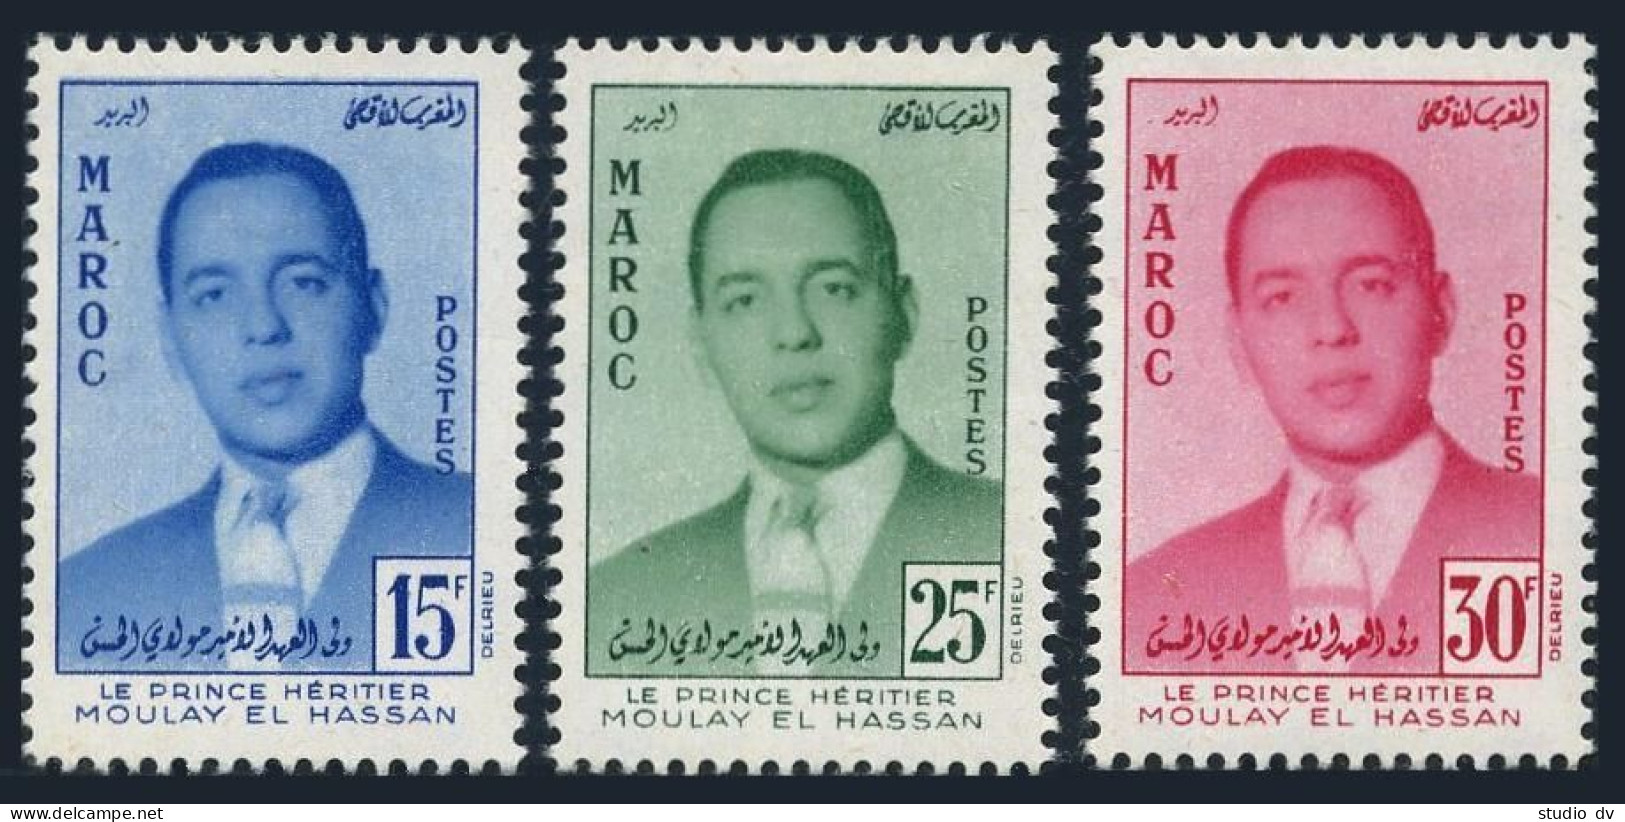 Morocco 16-18,hinged.Michel 426-428. Prince Moulay El Hassan,1957. - Morocco (1956-...)